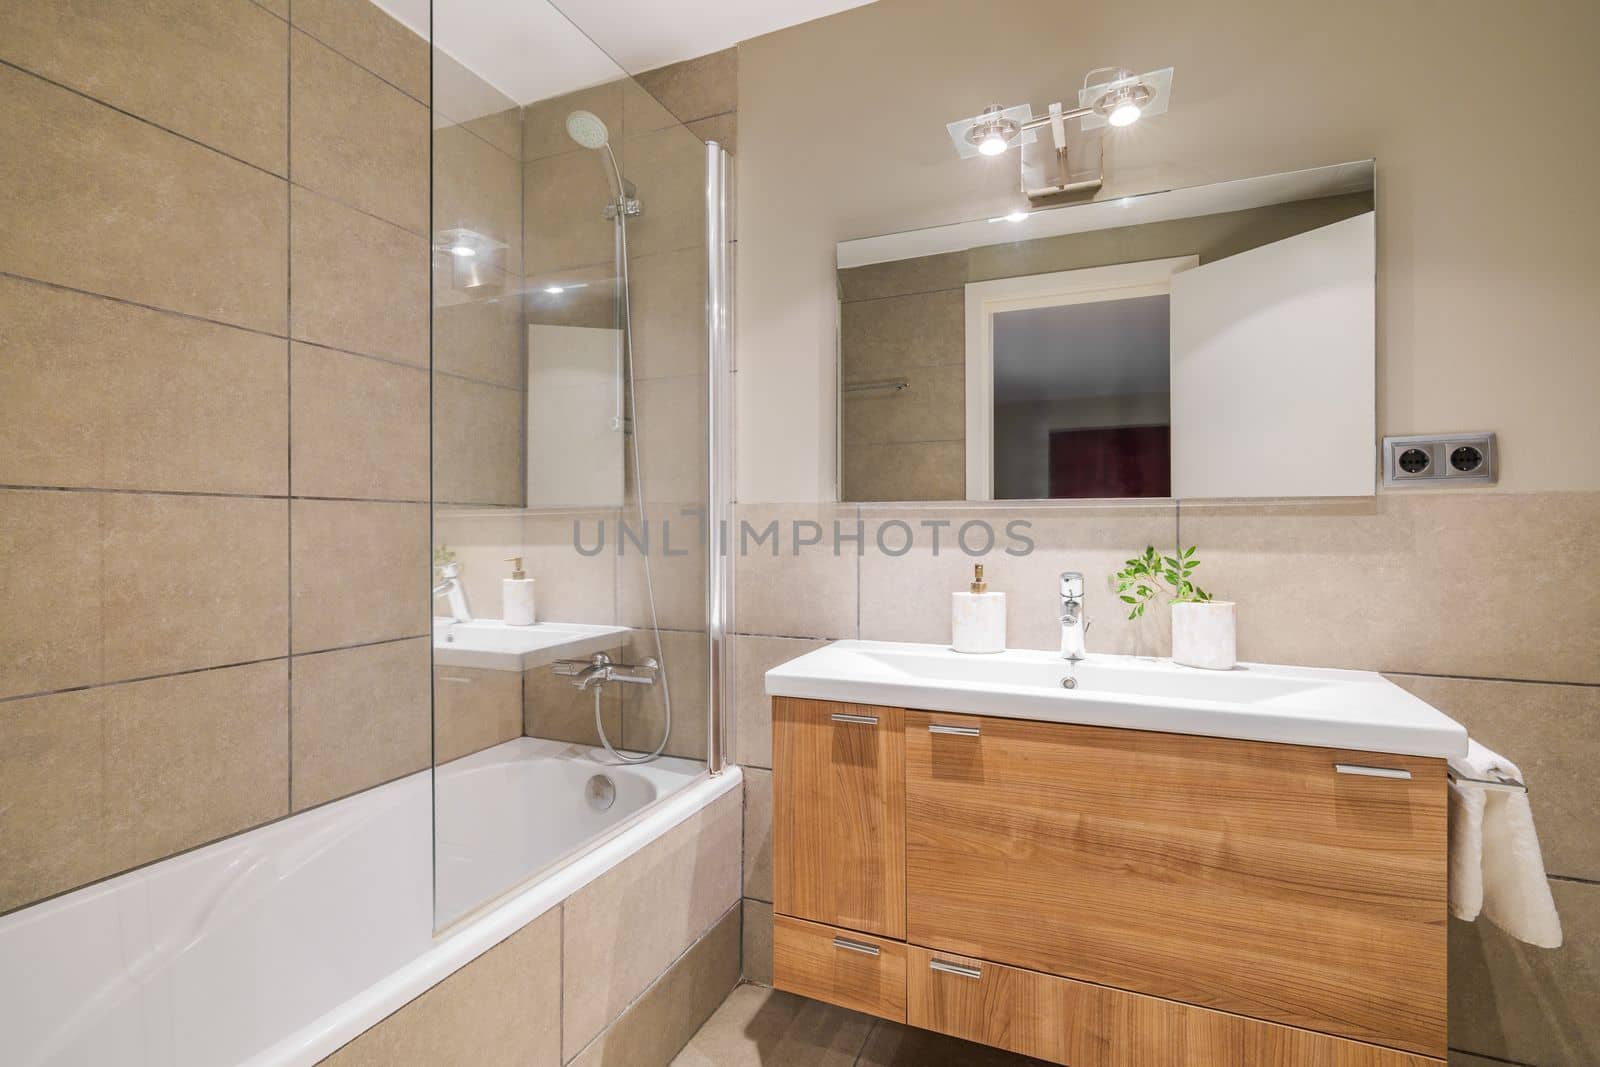 Bathroom in beautiful beige color. Vanity top sink with wooden drawers. Bathtub is fenced with protective glass from splashes. Front door is reflected in square large mirror opposite